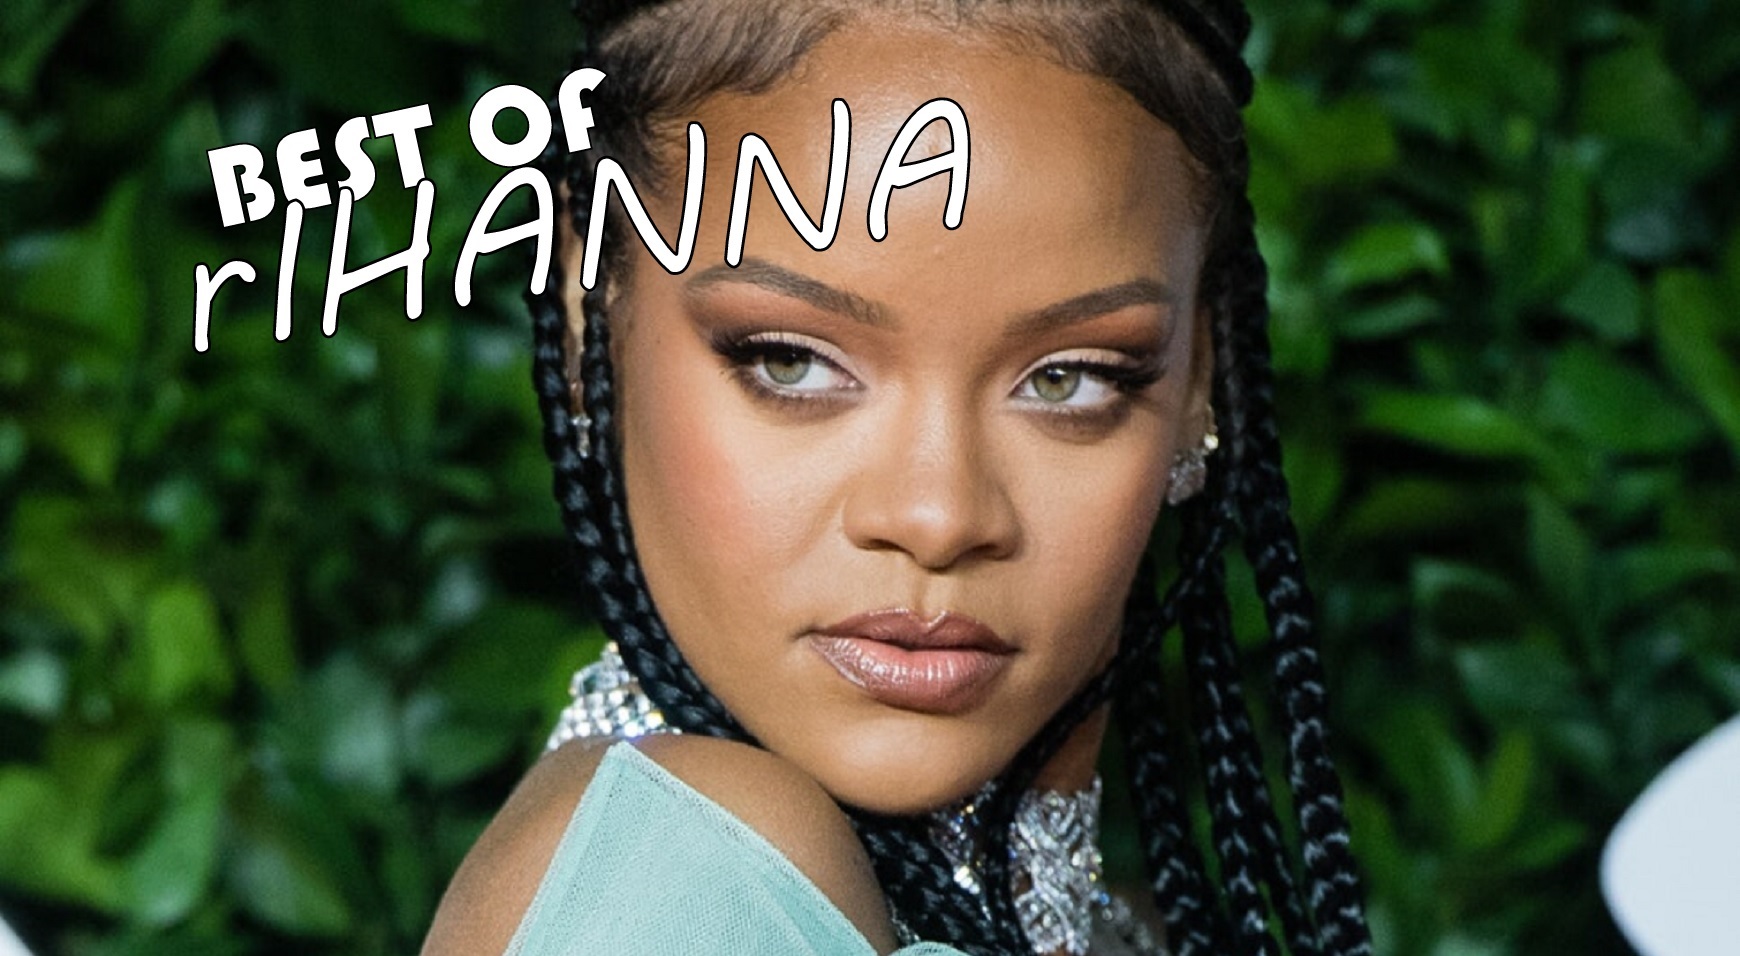 Ranking Top 10 Best Songs Of Rihanna That You Ought To Know If you’re a Fan